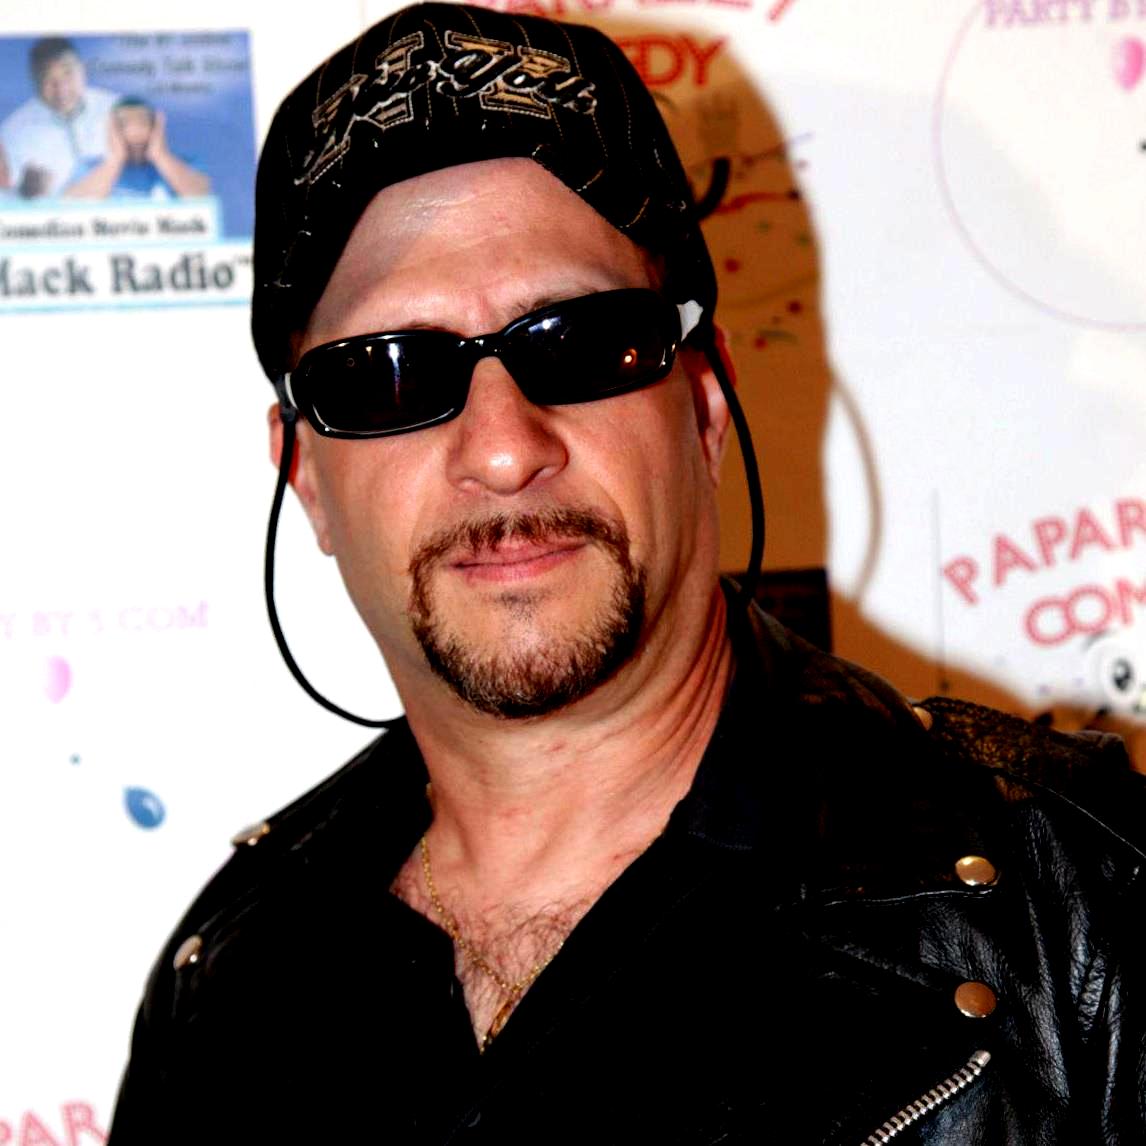 Tony Milazzo on the red carpet at a benefit just before taking the stage for some standup at the Jon Lovitz Comedy Club, Universal Studios in Hollywood.